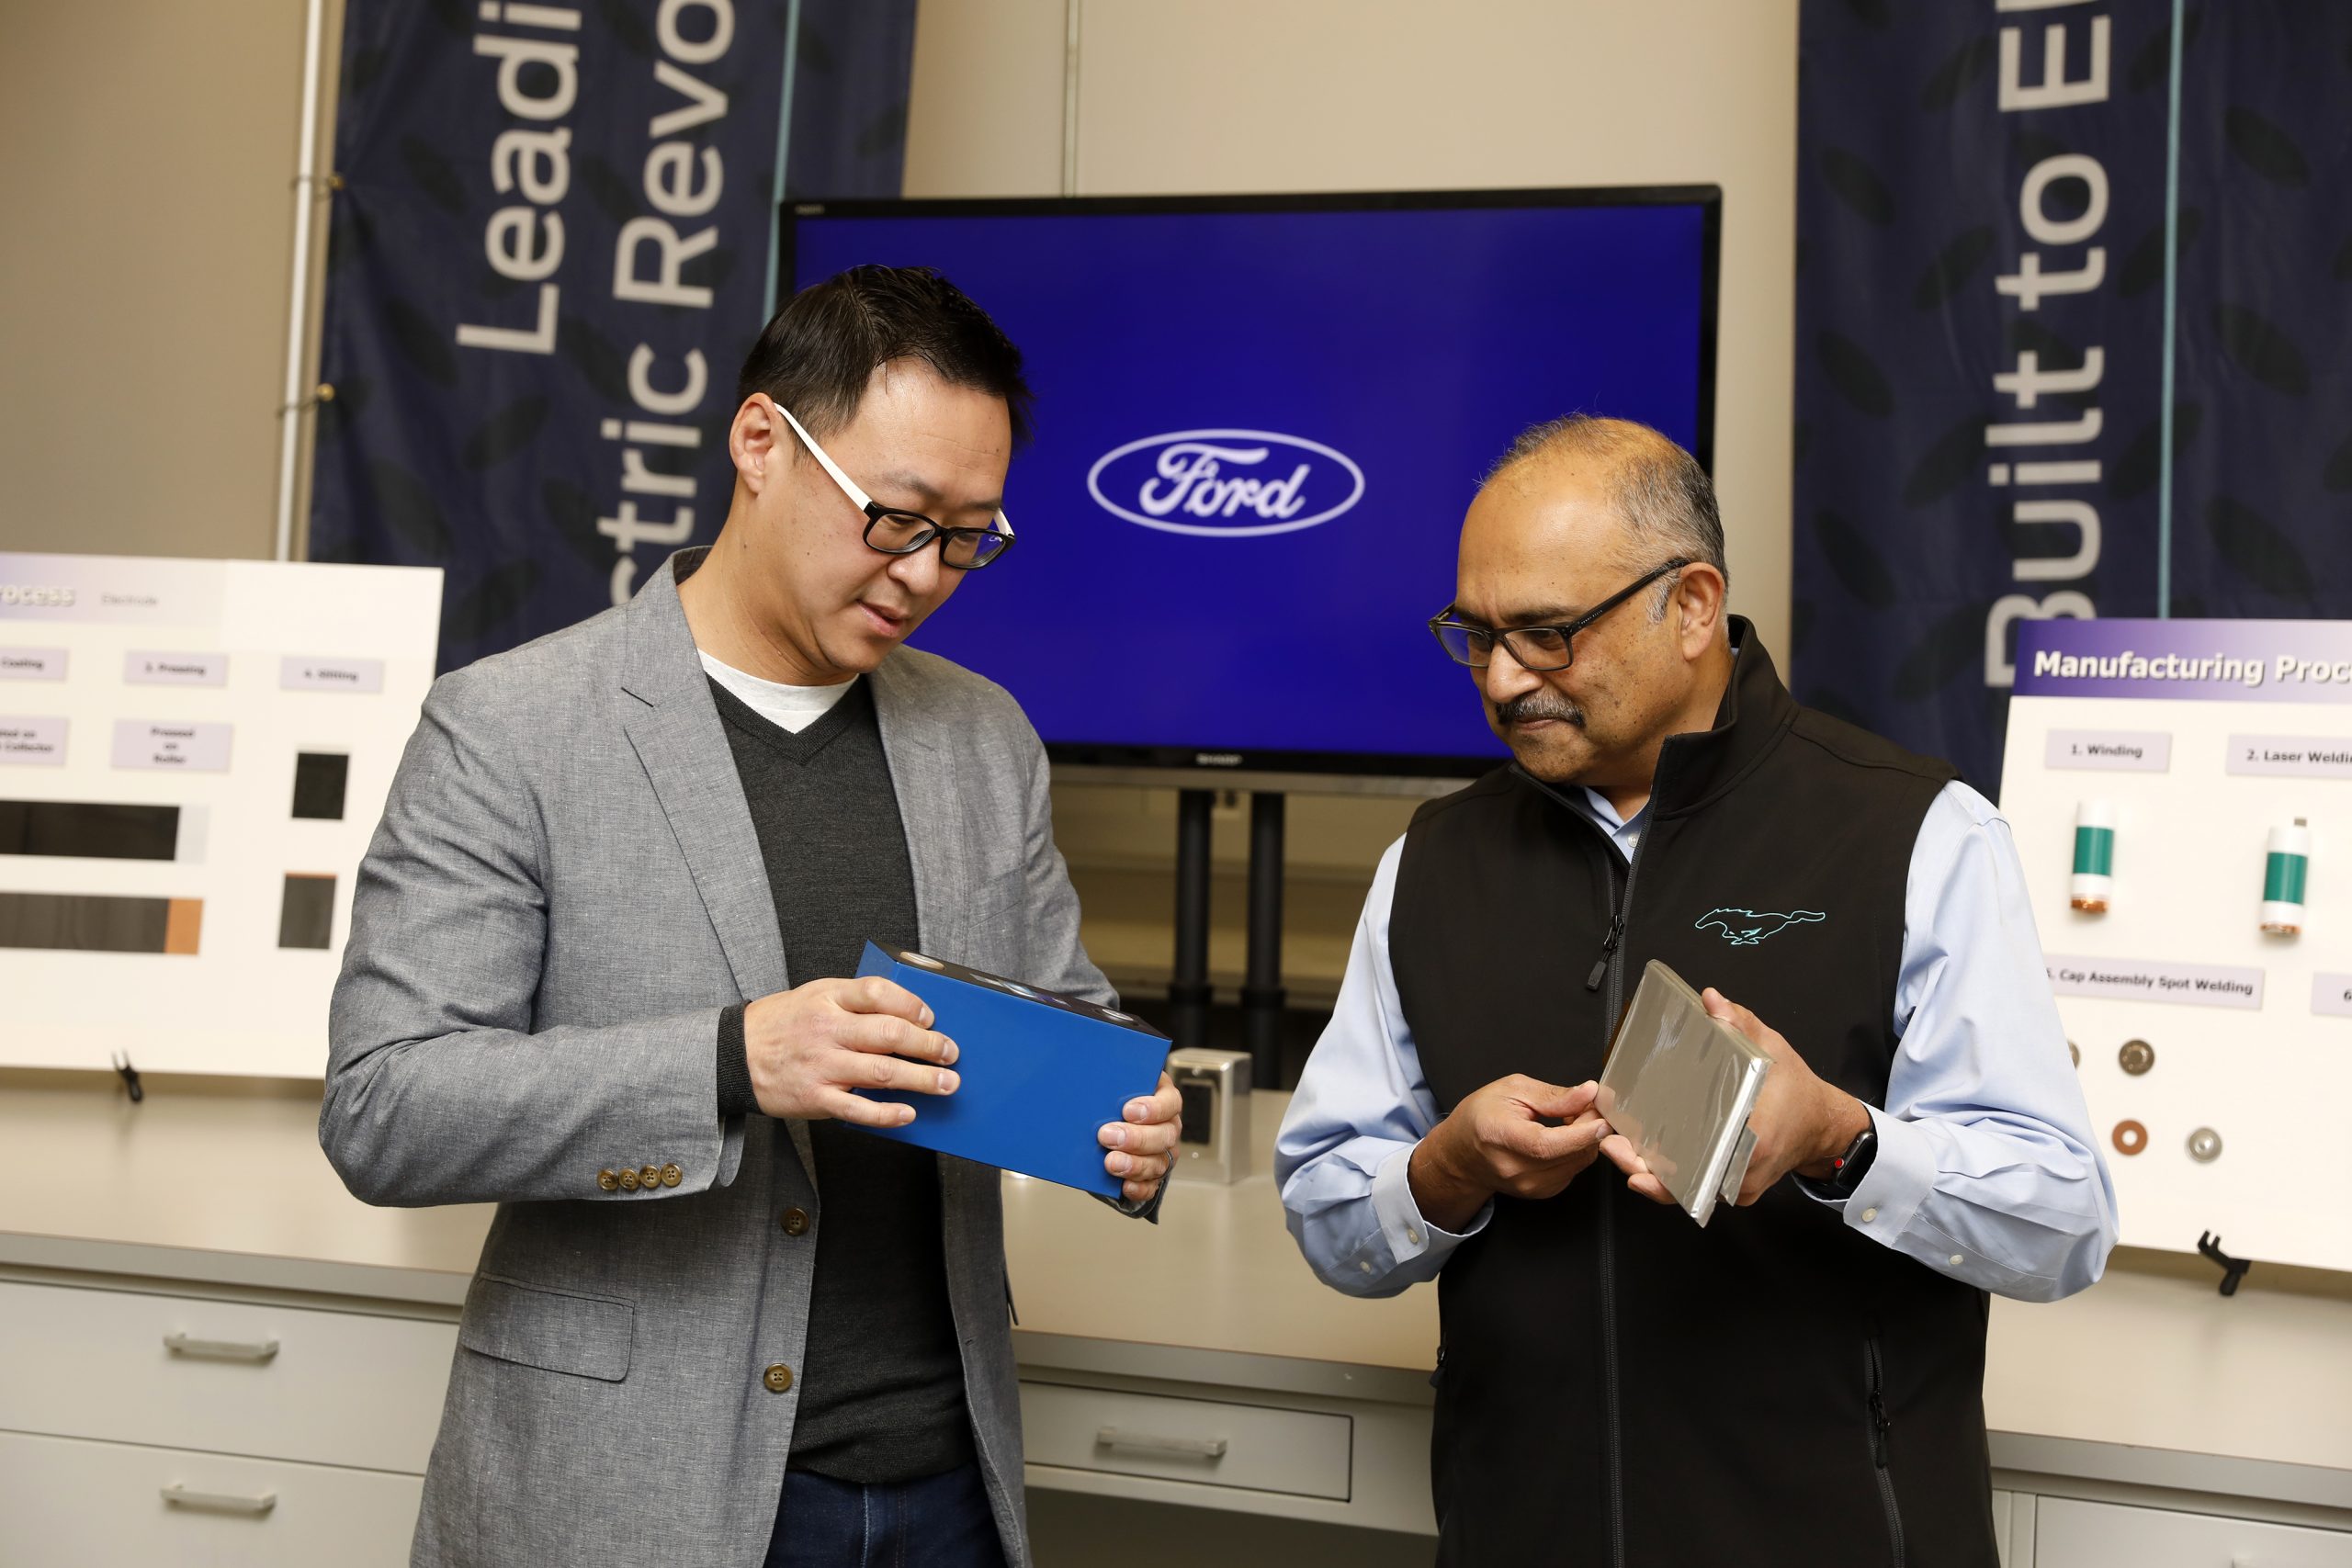 Ford costs are Not Competitive in China announces sweeping changes